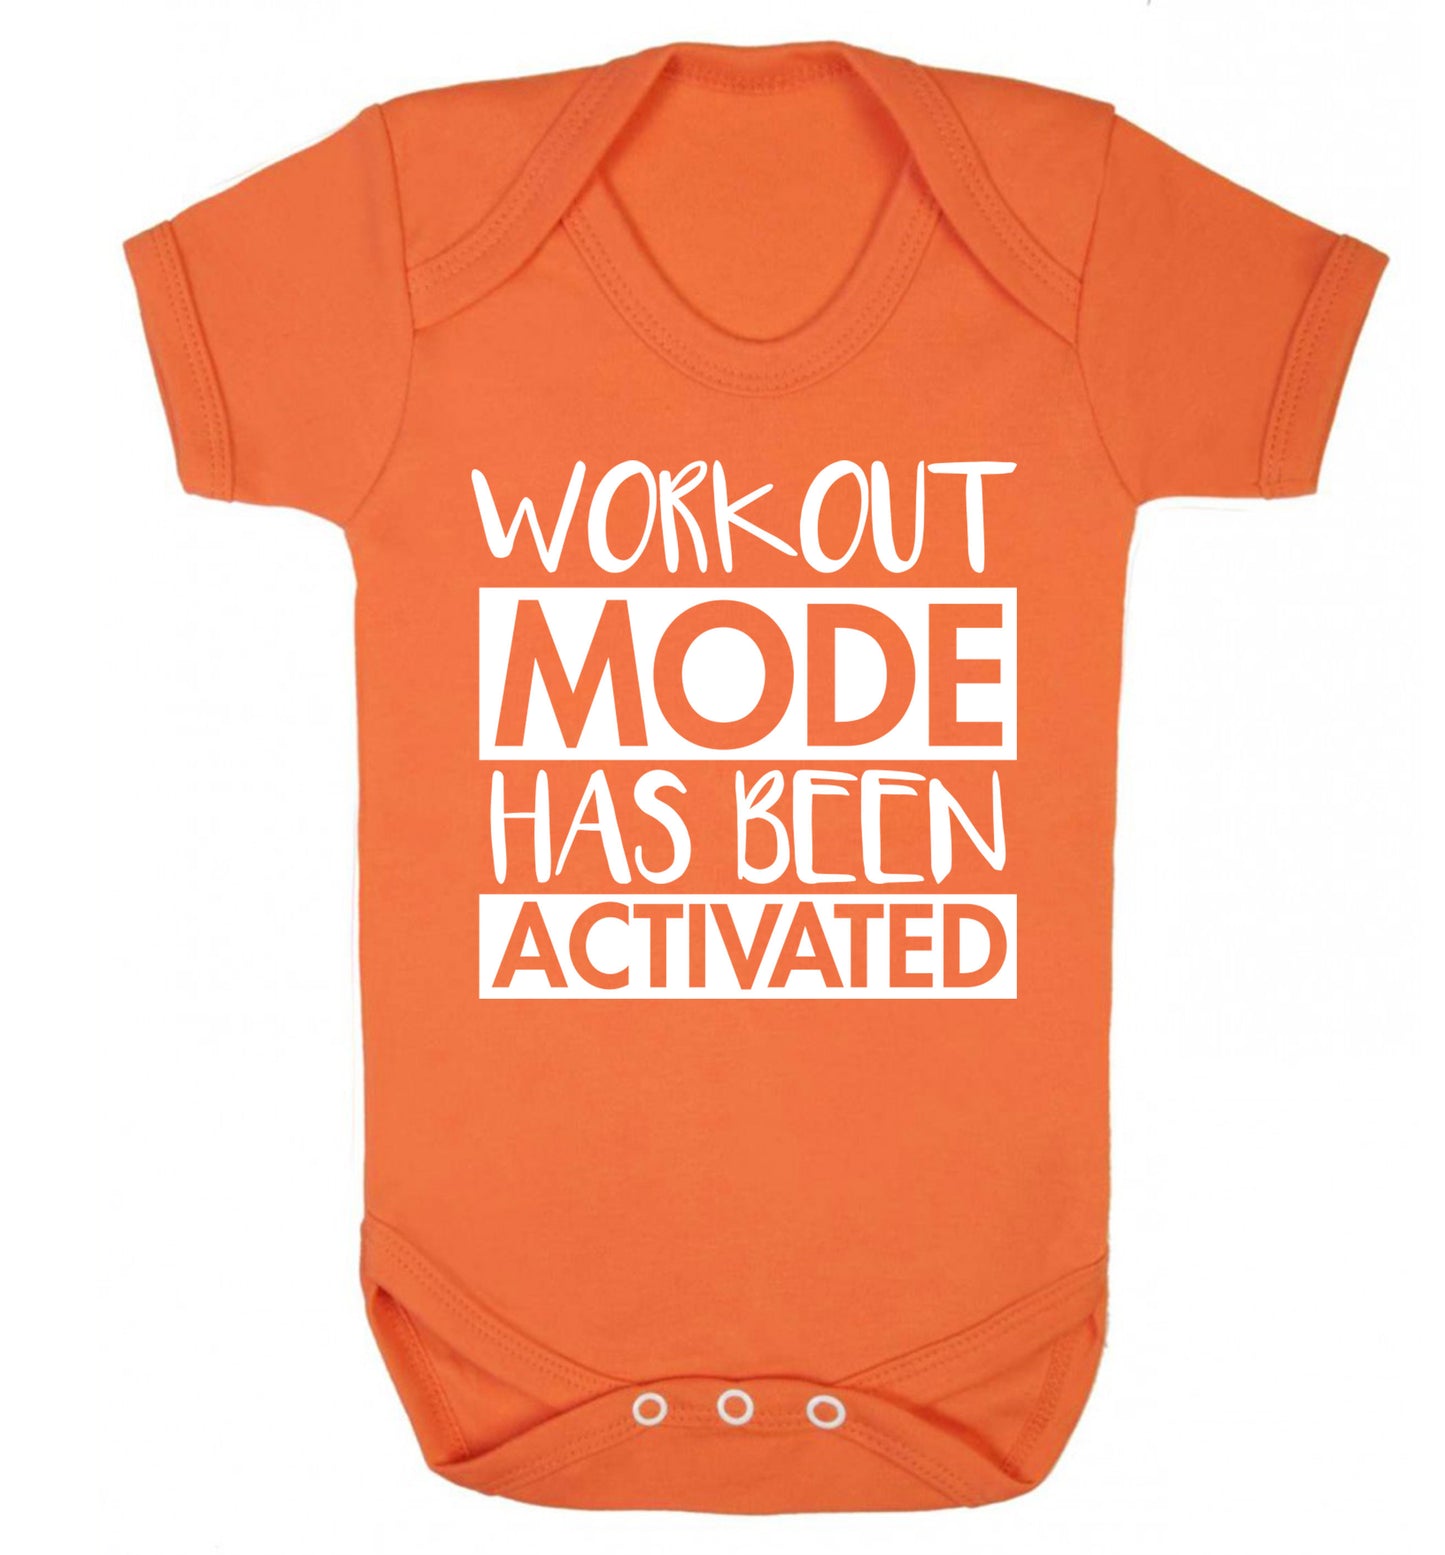 Workout mode has been activated Baby Vest orange 18-24 months